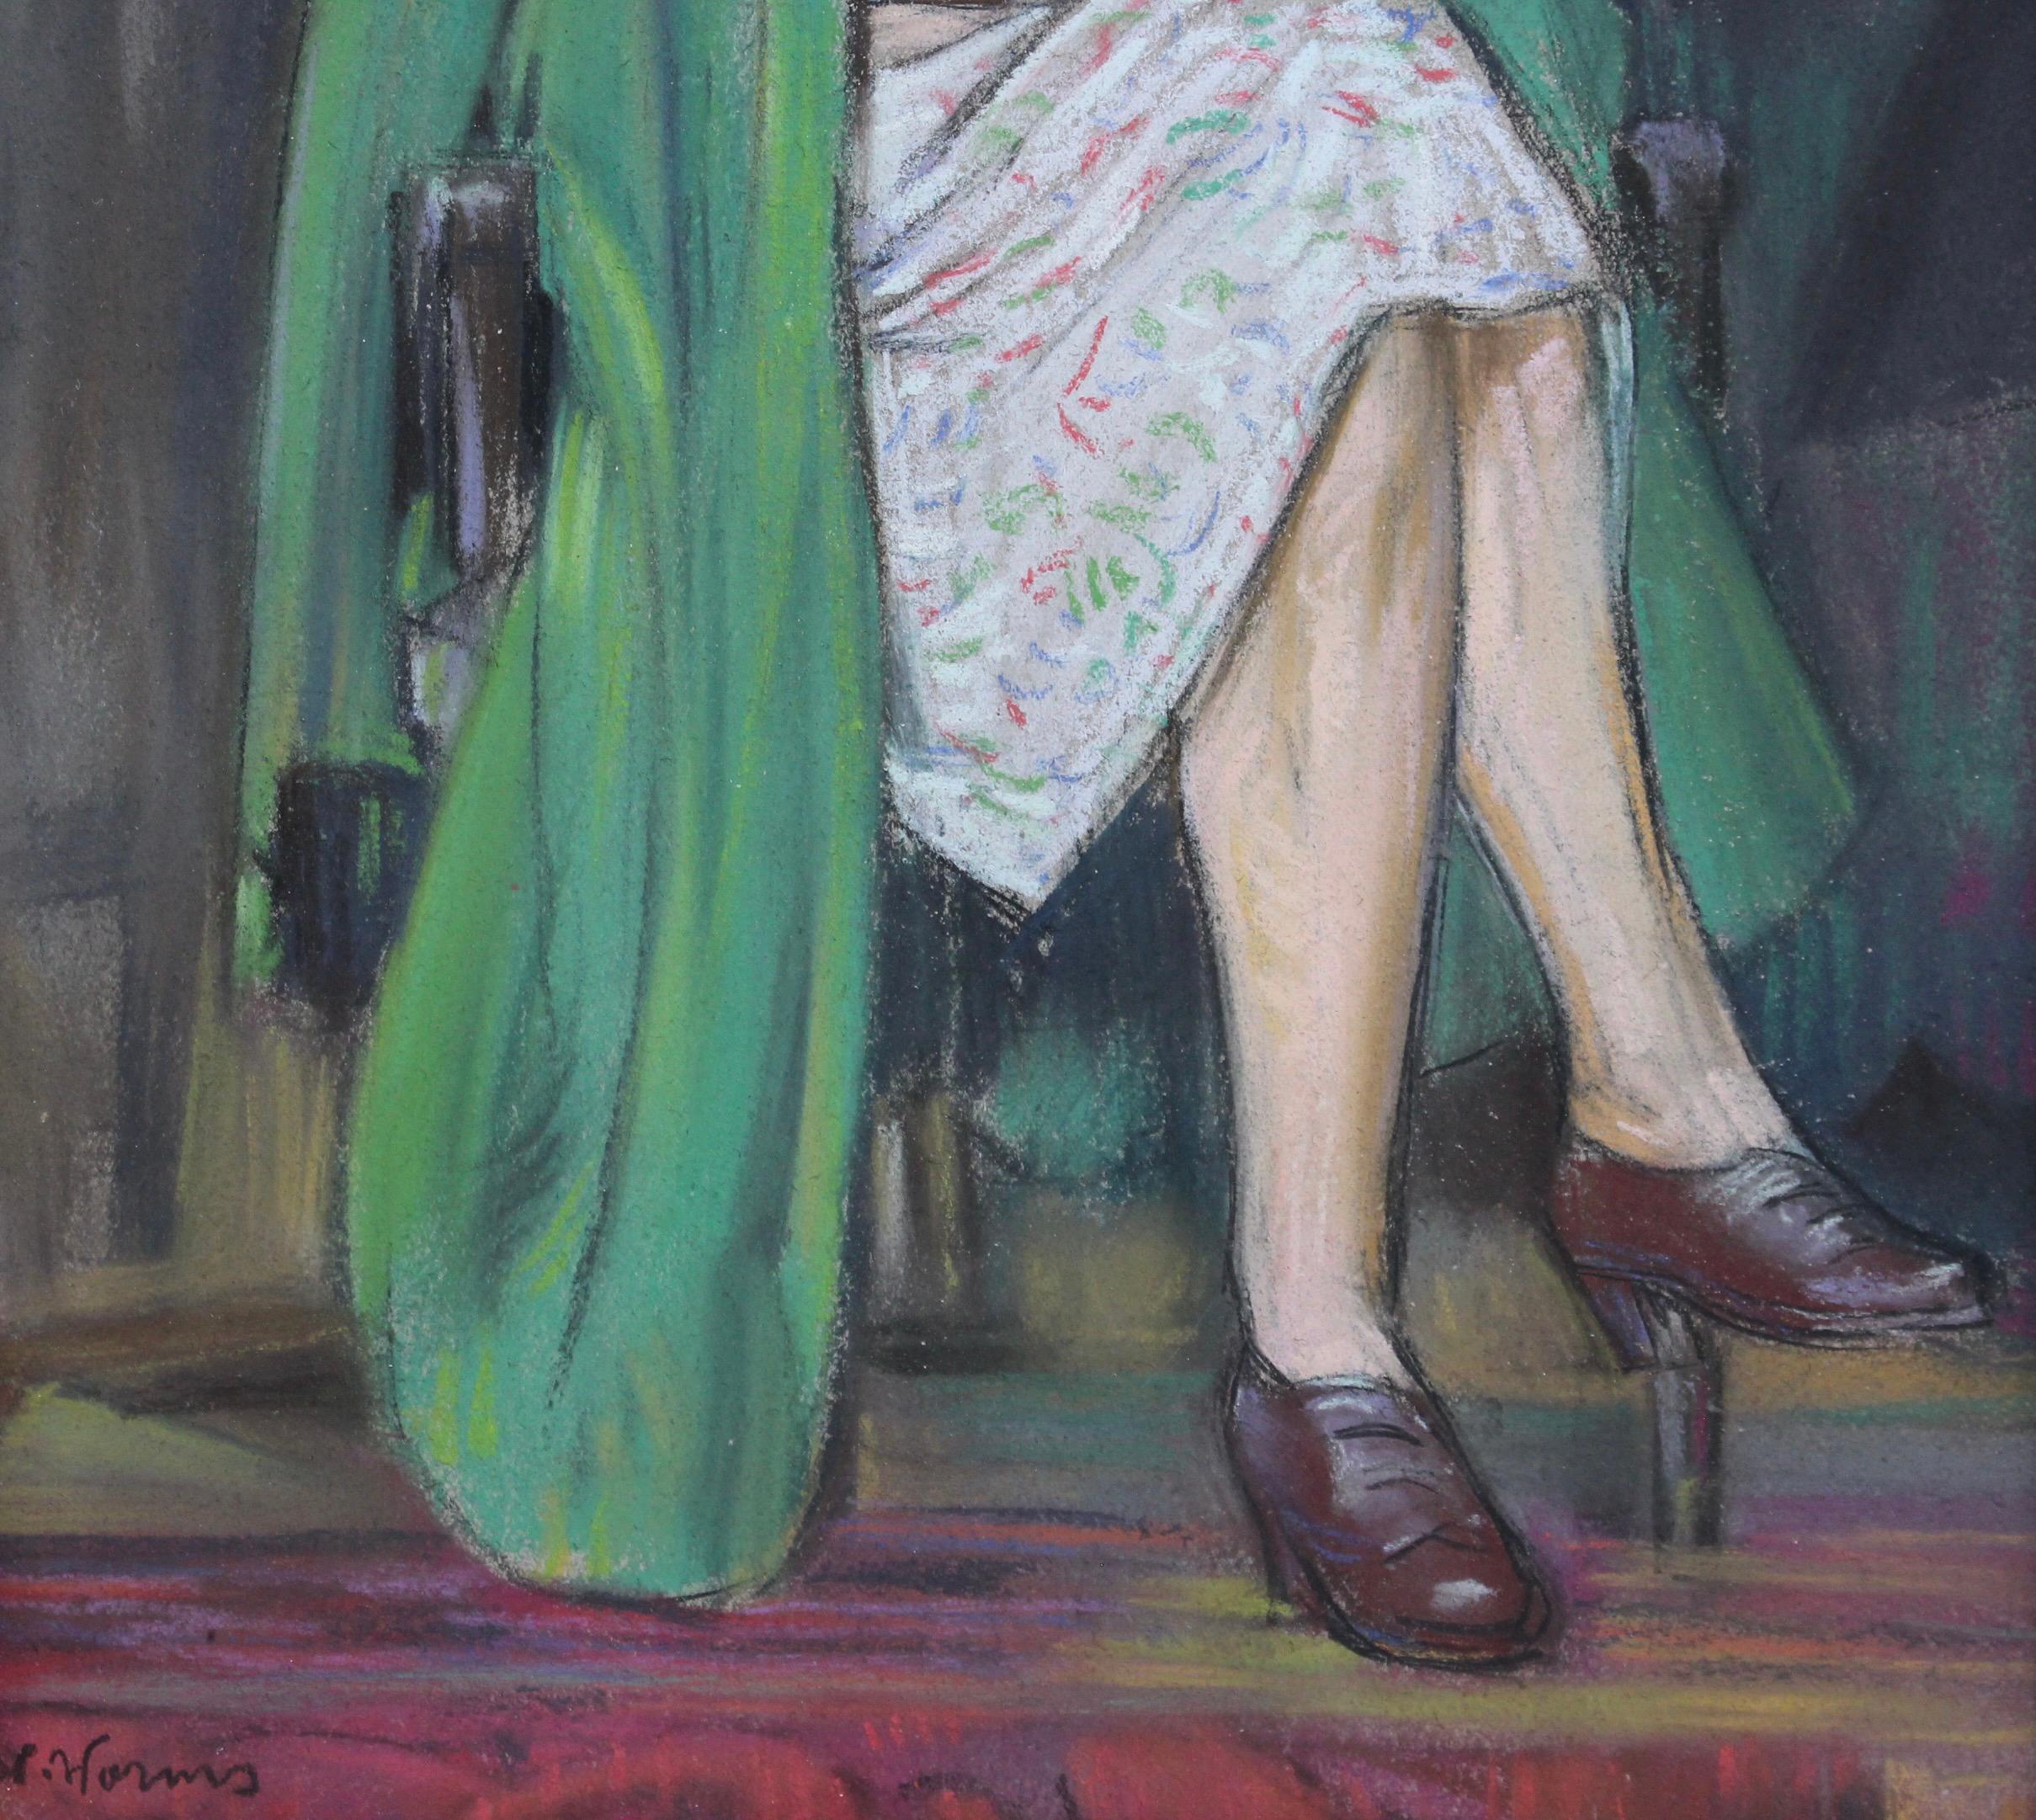 'The Green Coat', pastel on art paper, by W. Worms (circa 1950s). Tenderly portrayed and painted with masterly execution, one may suppose a close connection between artist and subject. Being seated indoors with coat implies that one is there